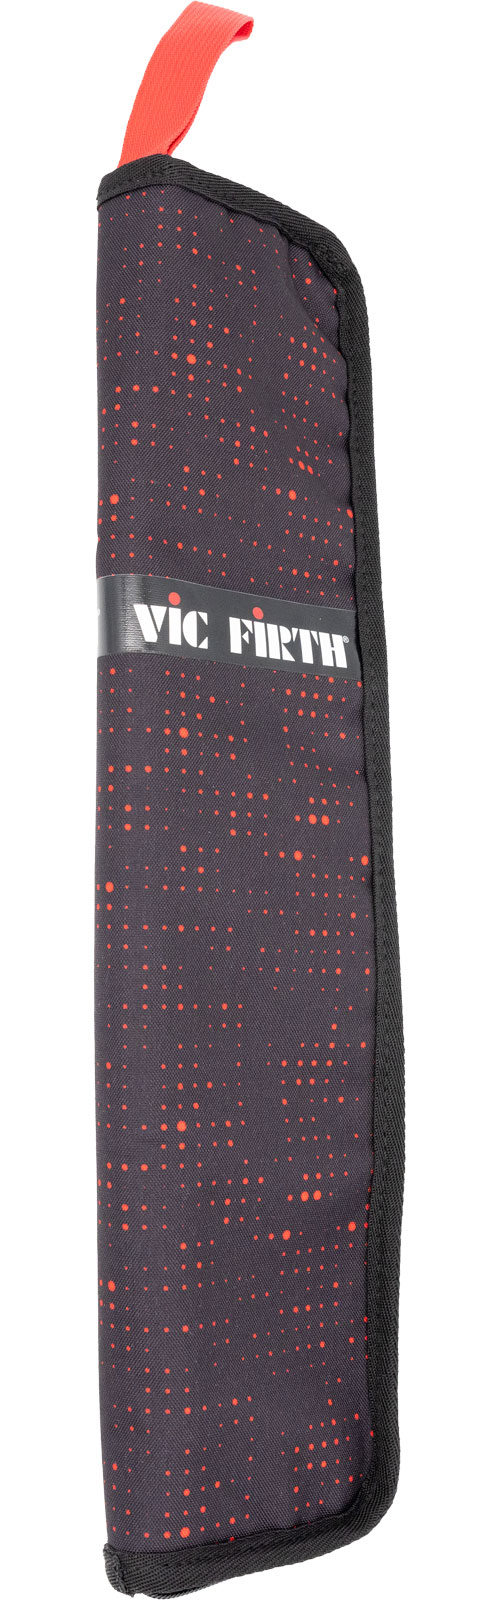 VIC FIRTH DRUMSTICK BAG VIC FIRTH ESSENTIAL - RED DOT